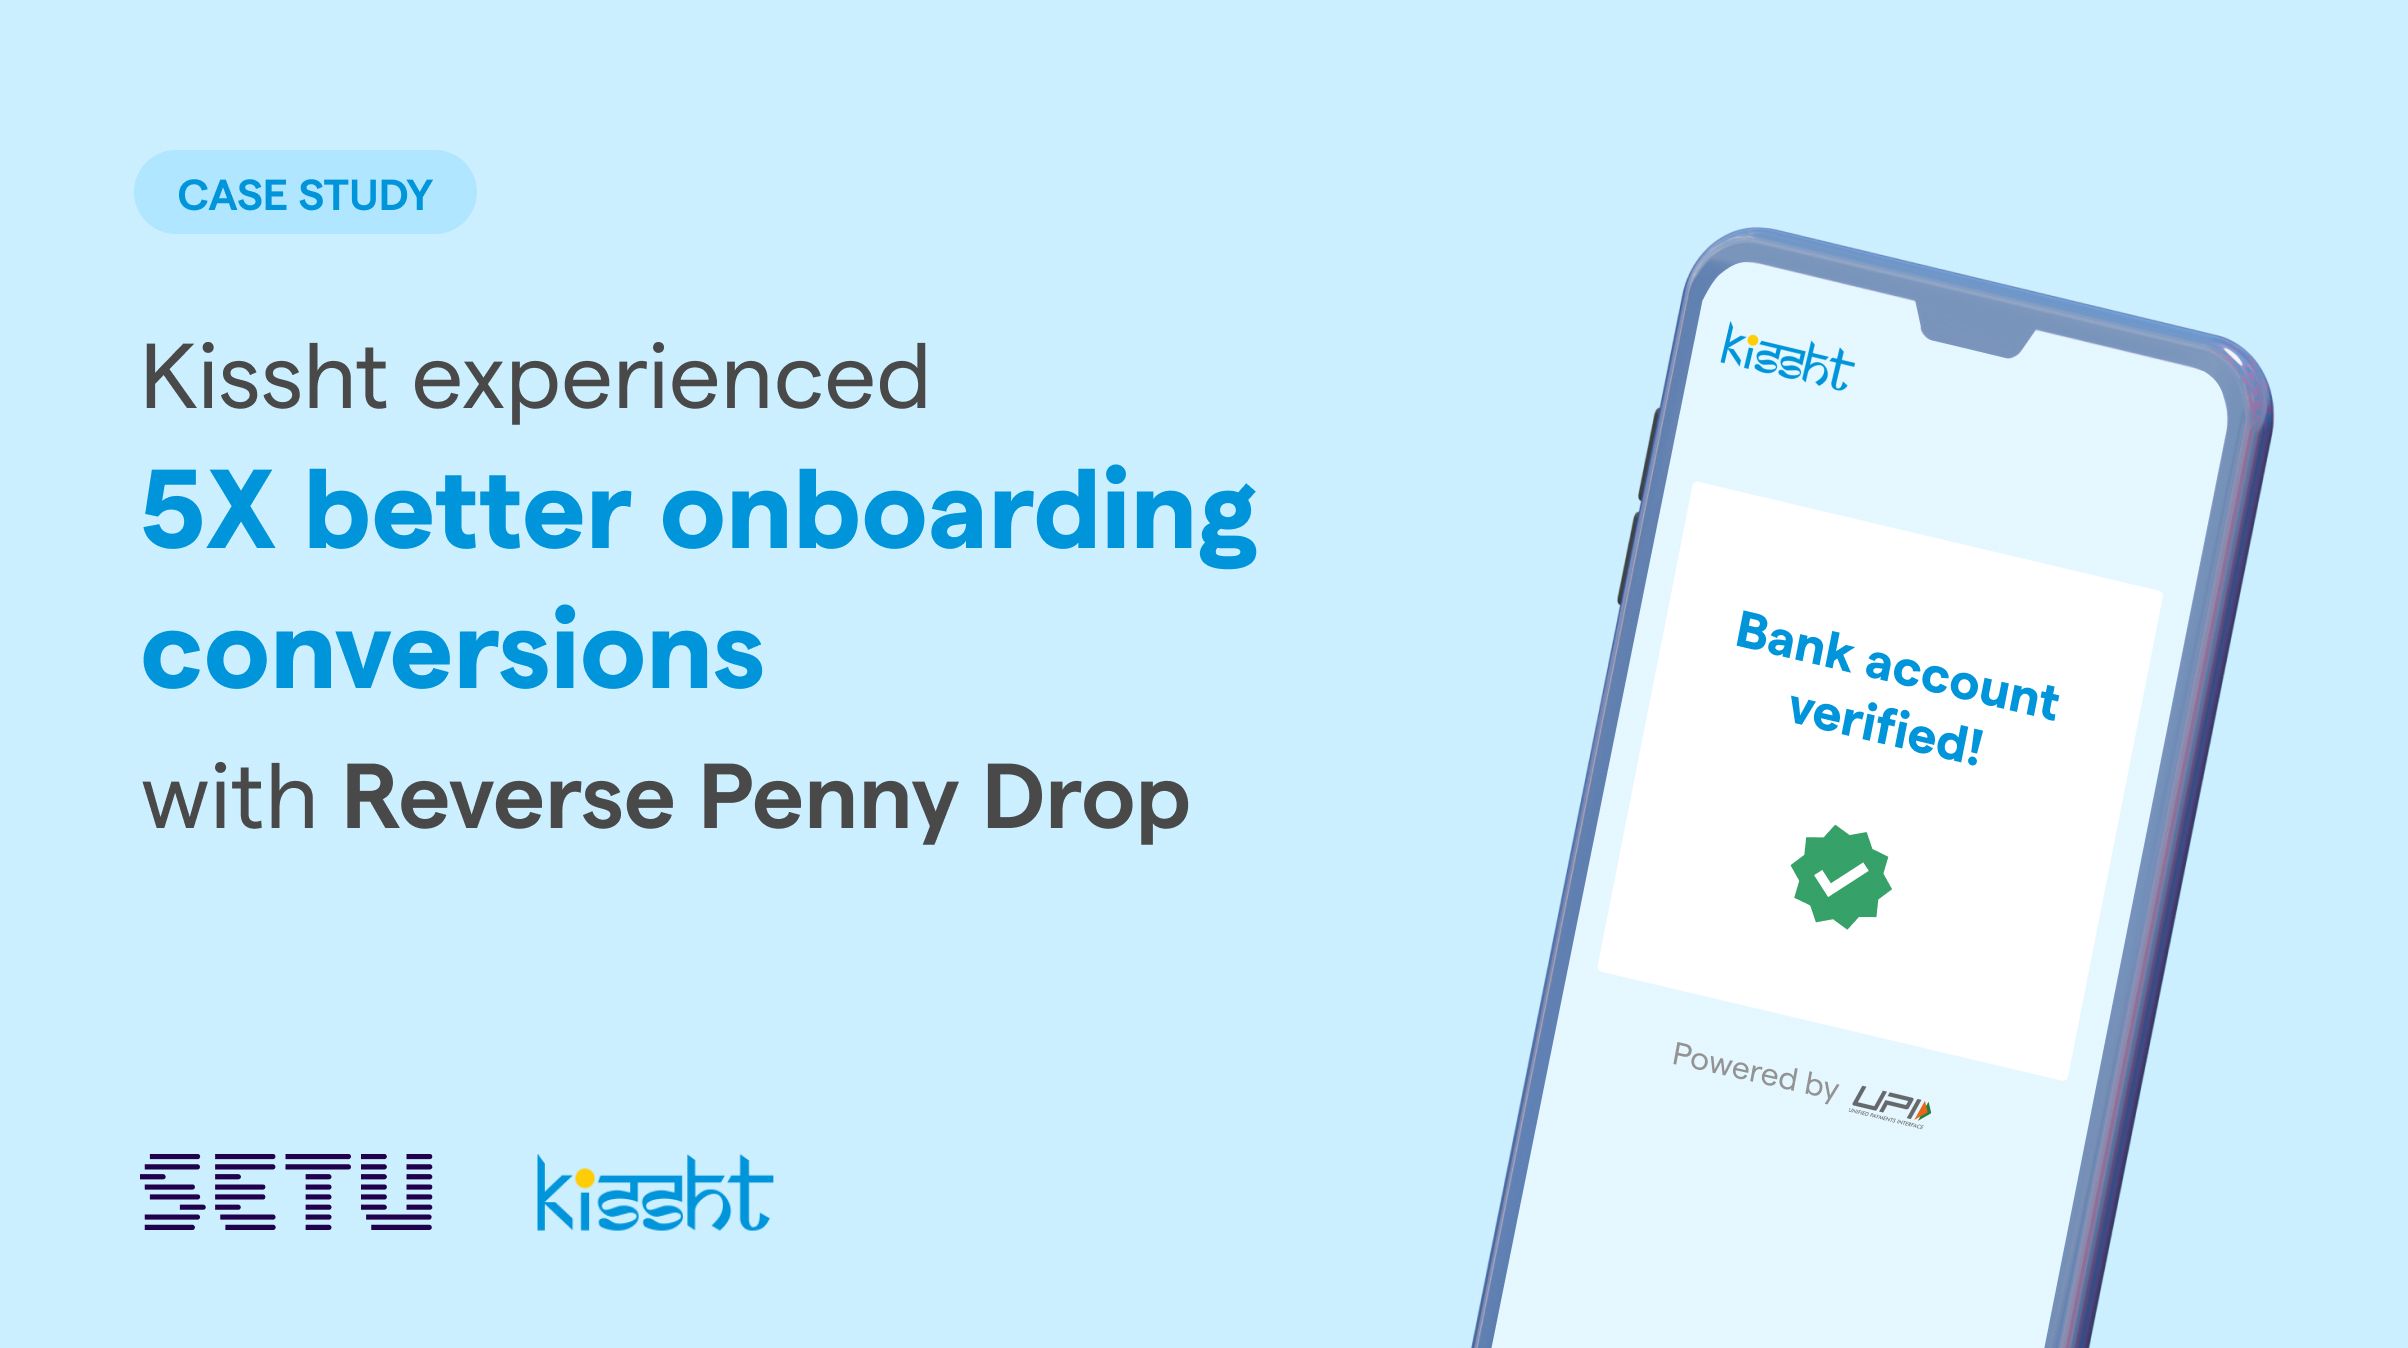 Here's how Kissht experienced 5X better onboarding conversions with Reverse Penny Drop title image